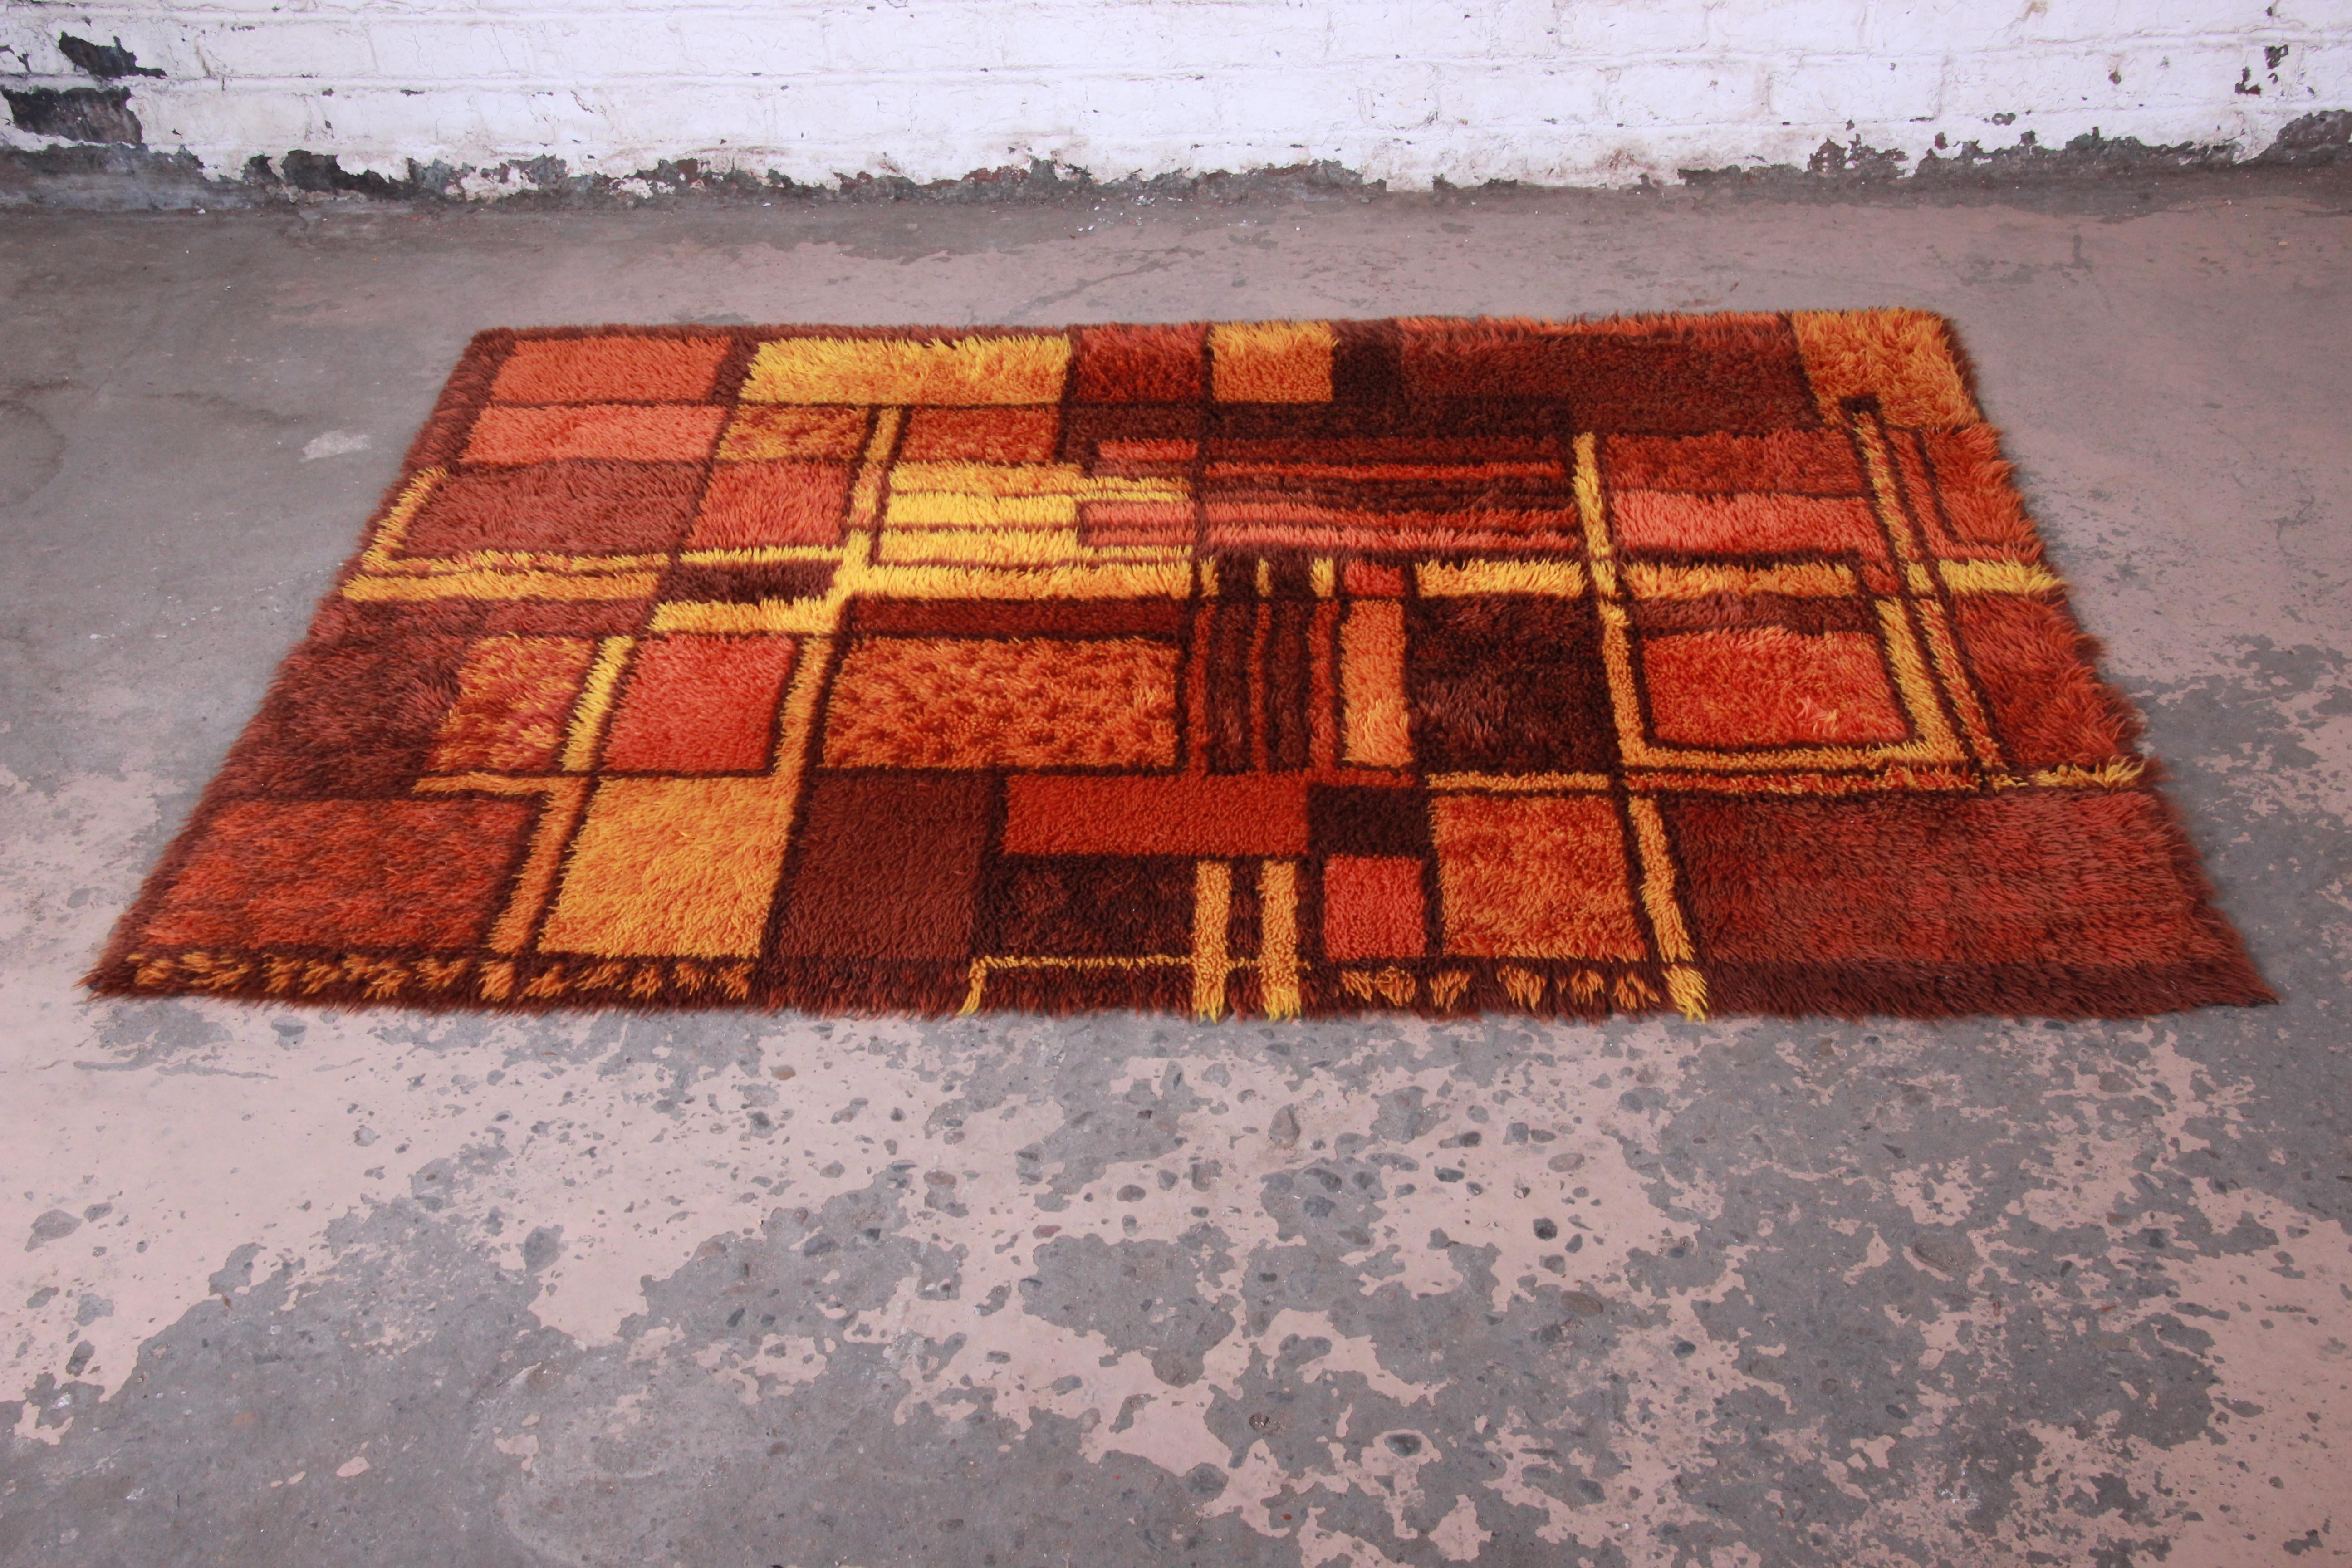 A gorgeous midcentury Danish modern Rya Shag rug. The rug has a unique abstract geometric design, with vivid colors in red, orange, and yellow. It has a thick wool pile and is in very good vintage condition. Measure: 4'5